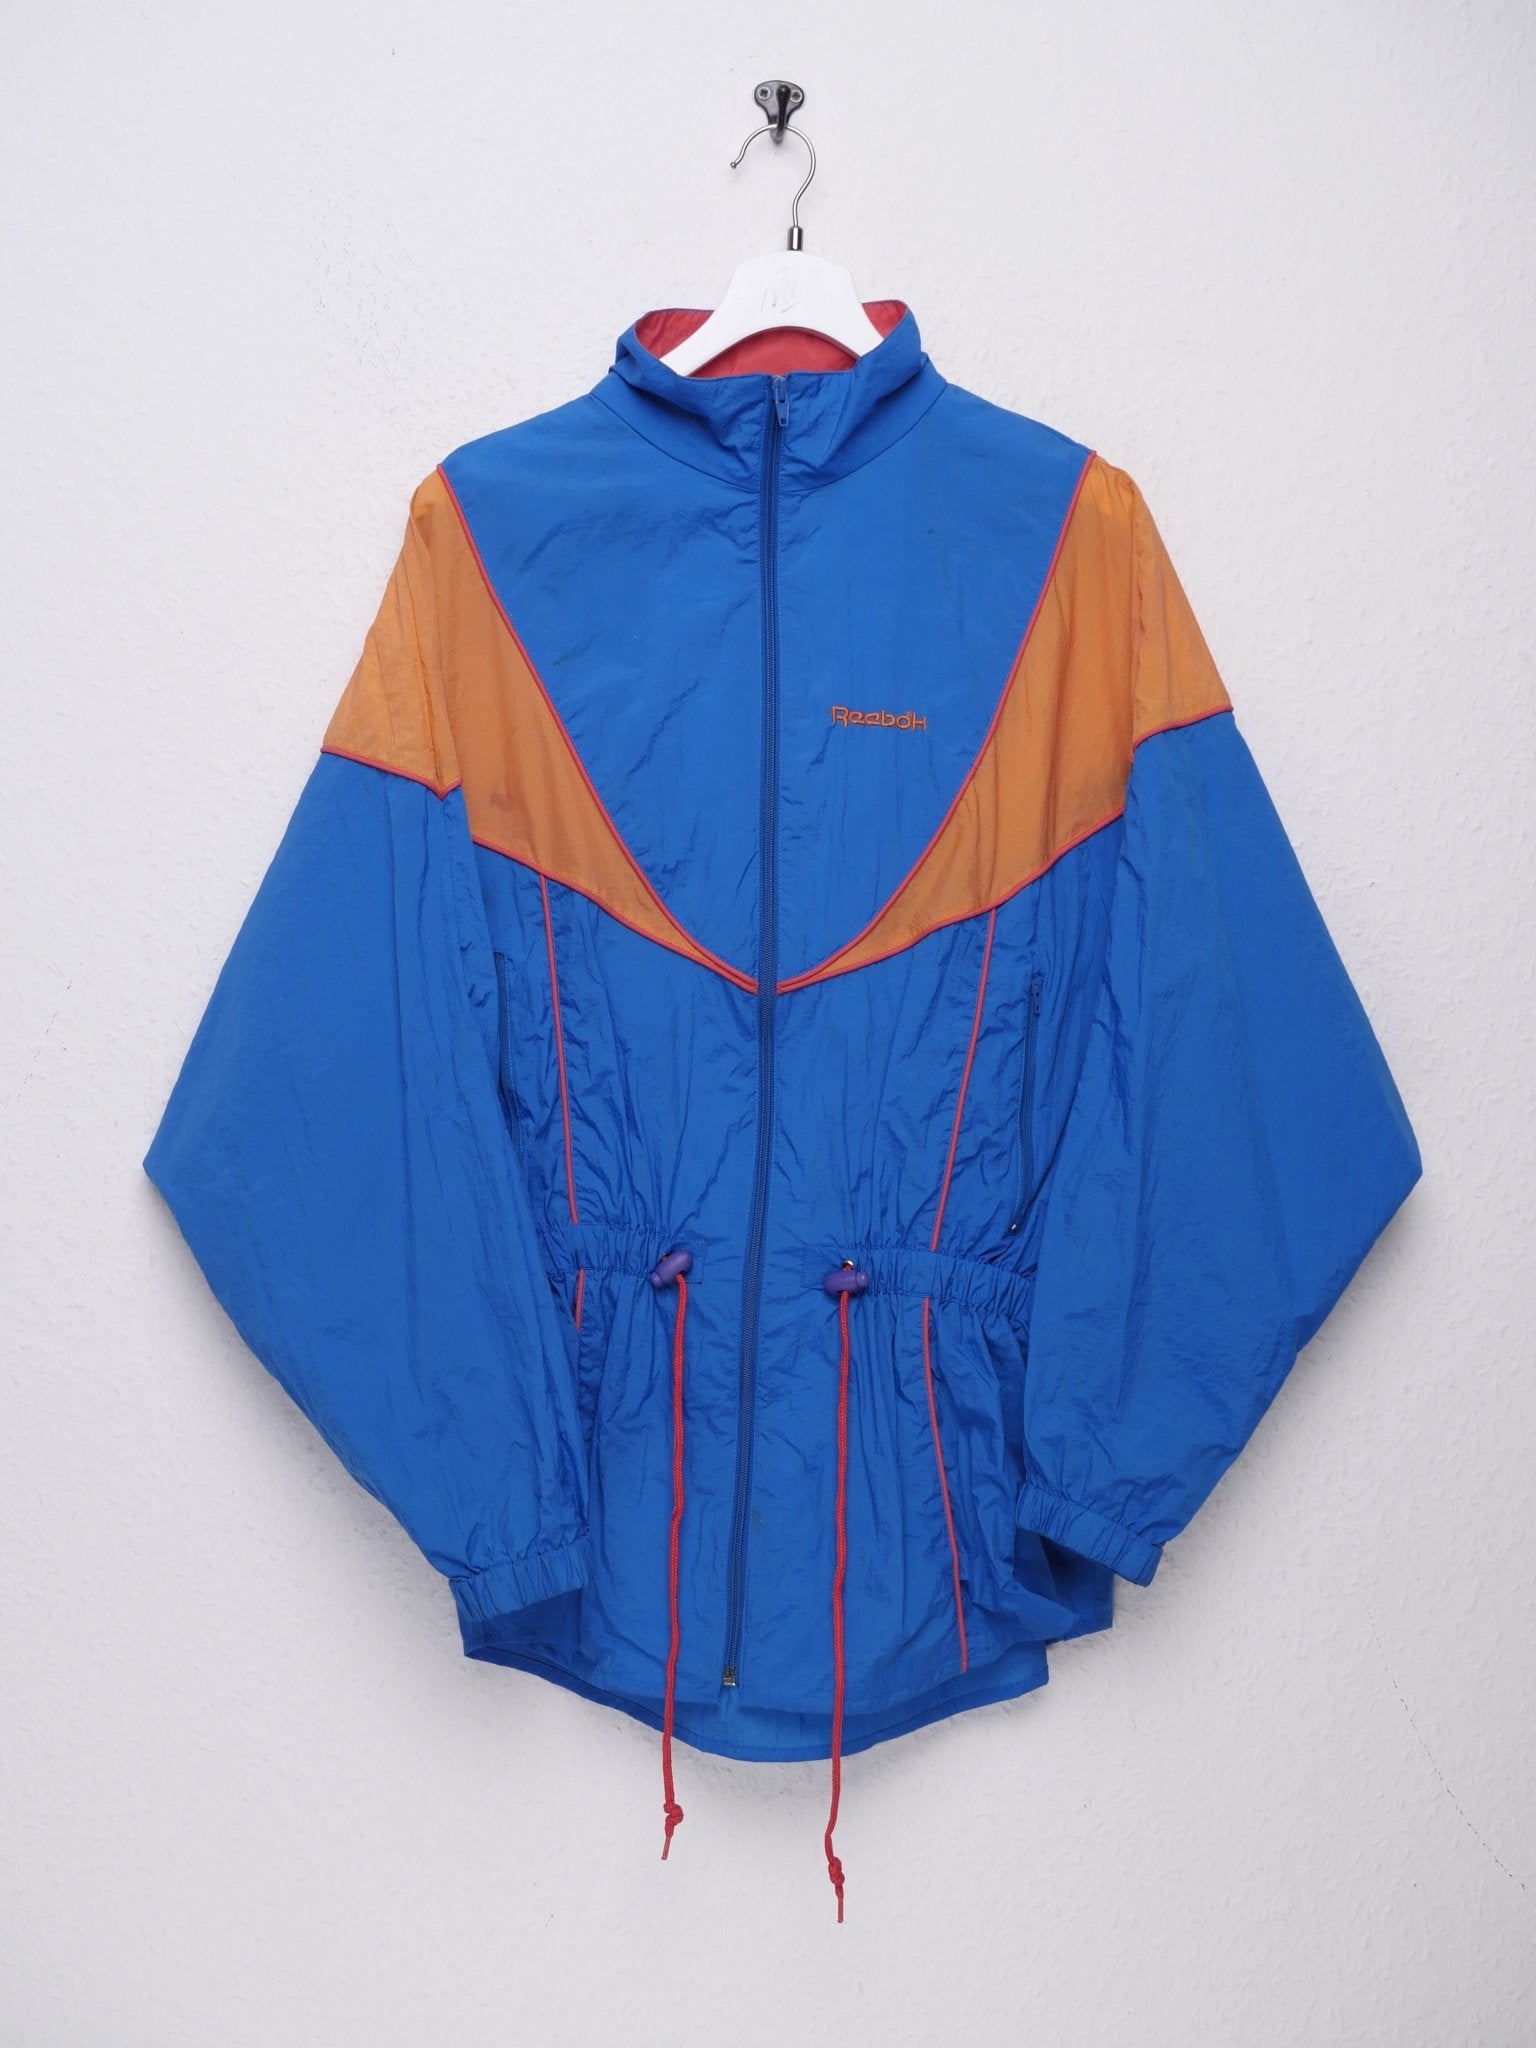 Reebok embroidered Spellout two toned Vintage Track Jacket - Peeces